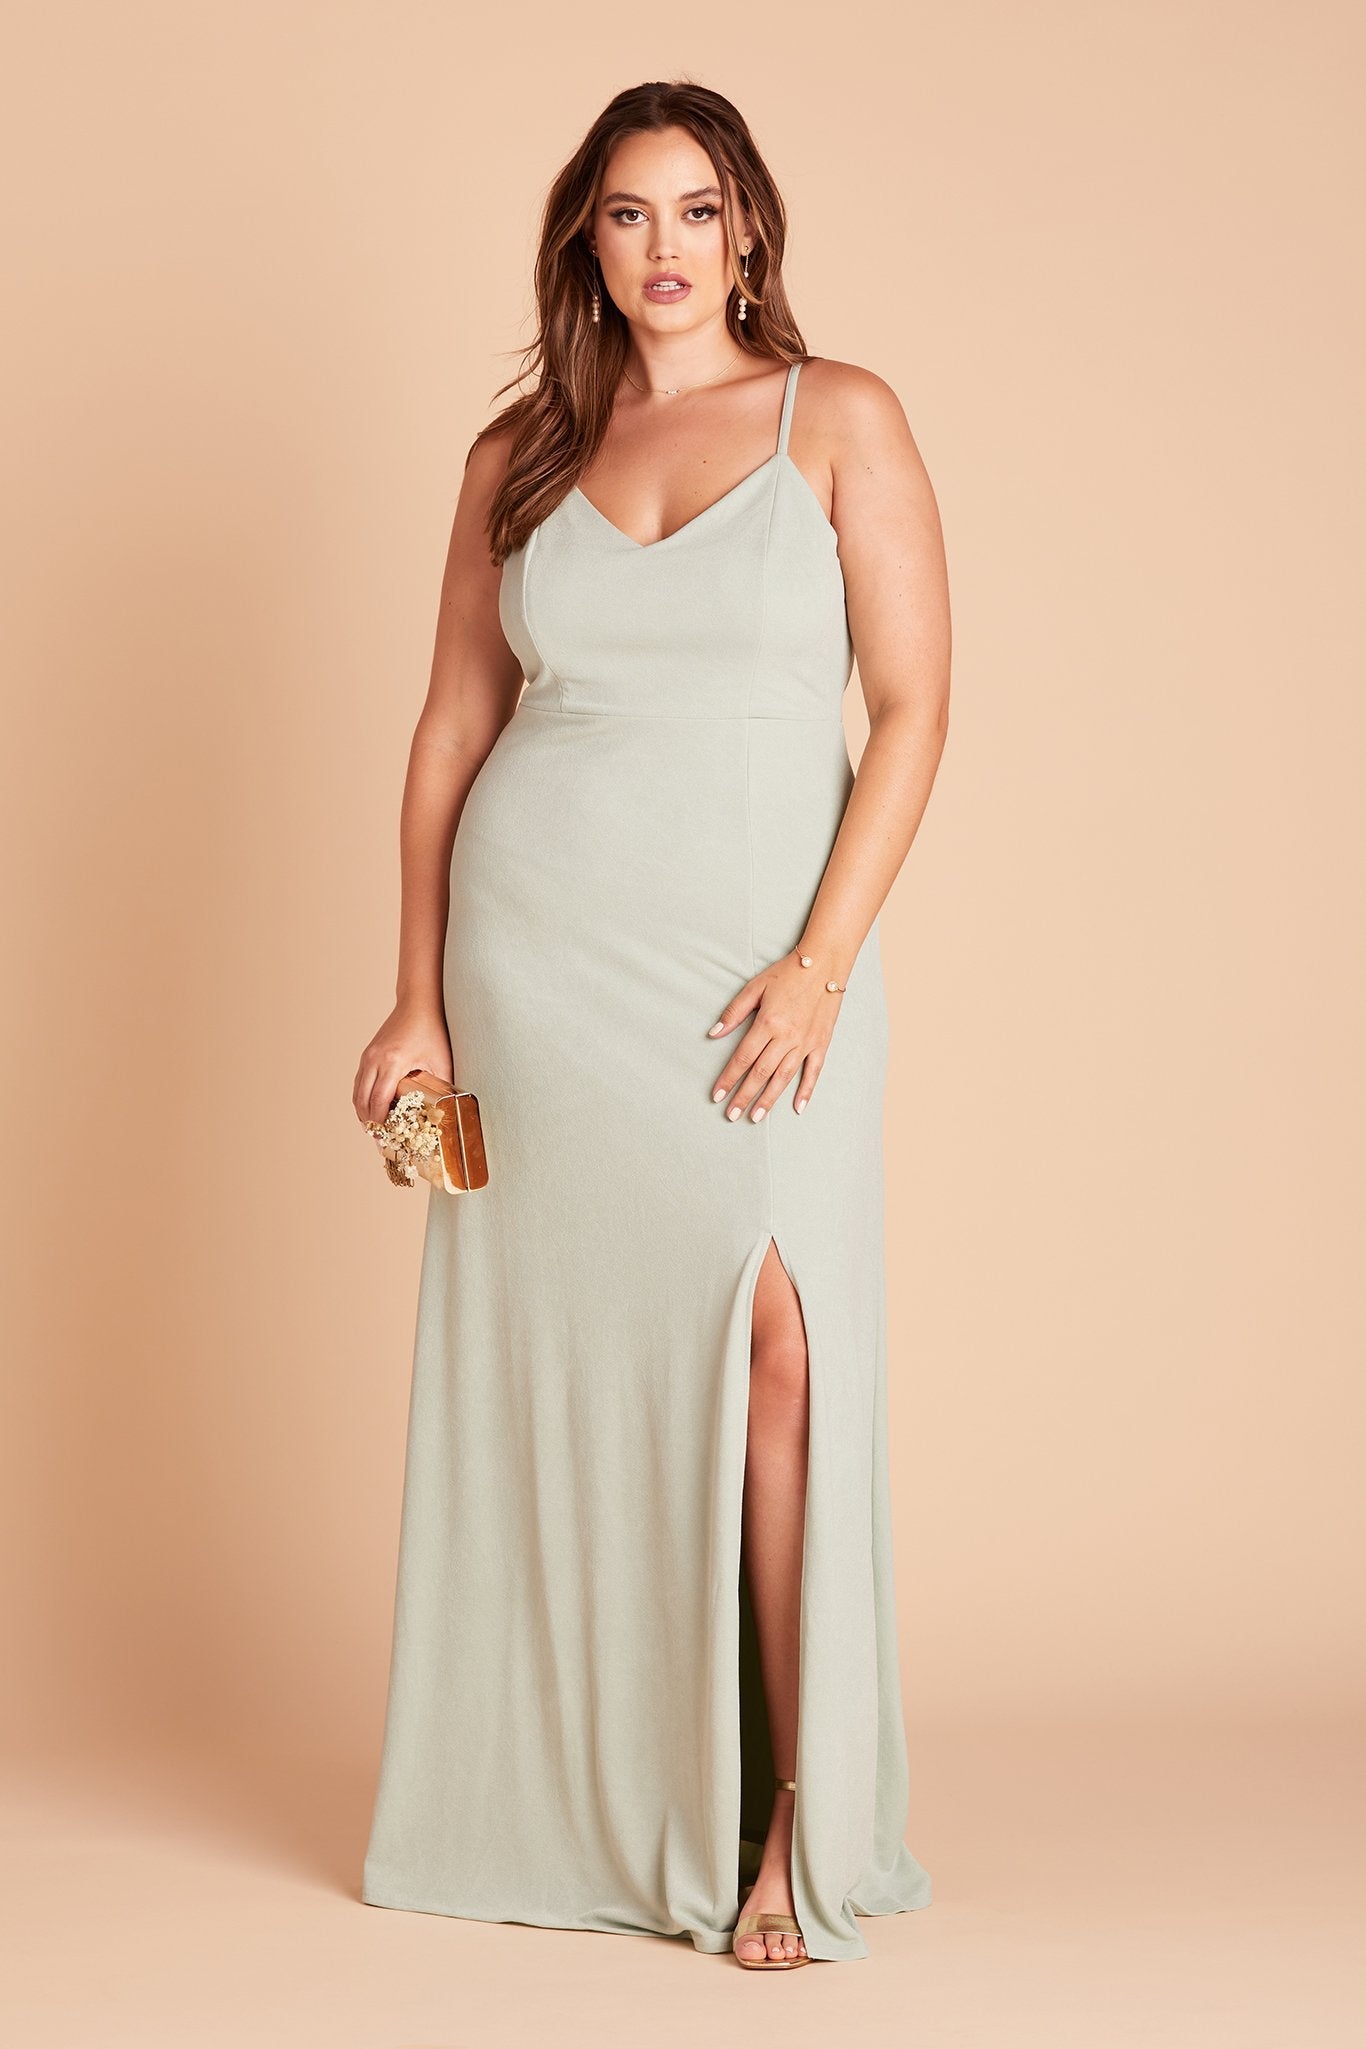 Jay plus size bridesmaid dress with slit in sage green crepe by Birdy Grey, front view